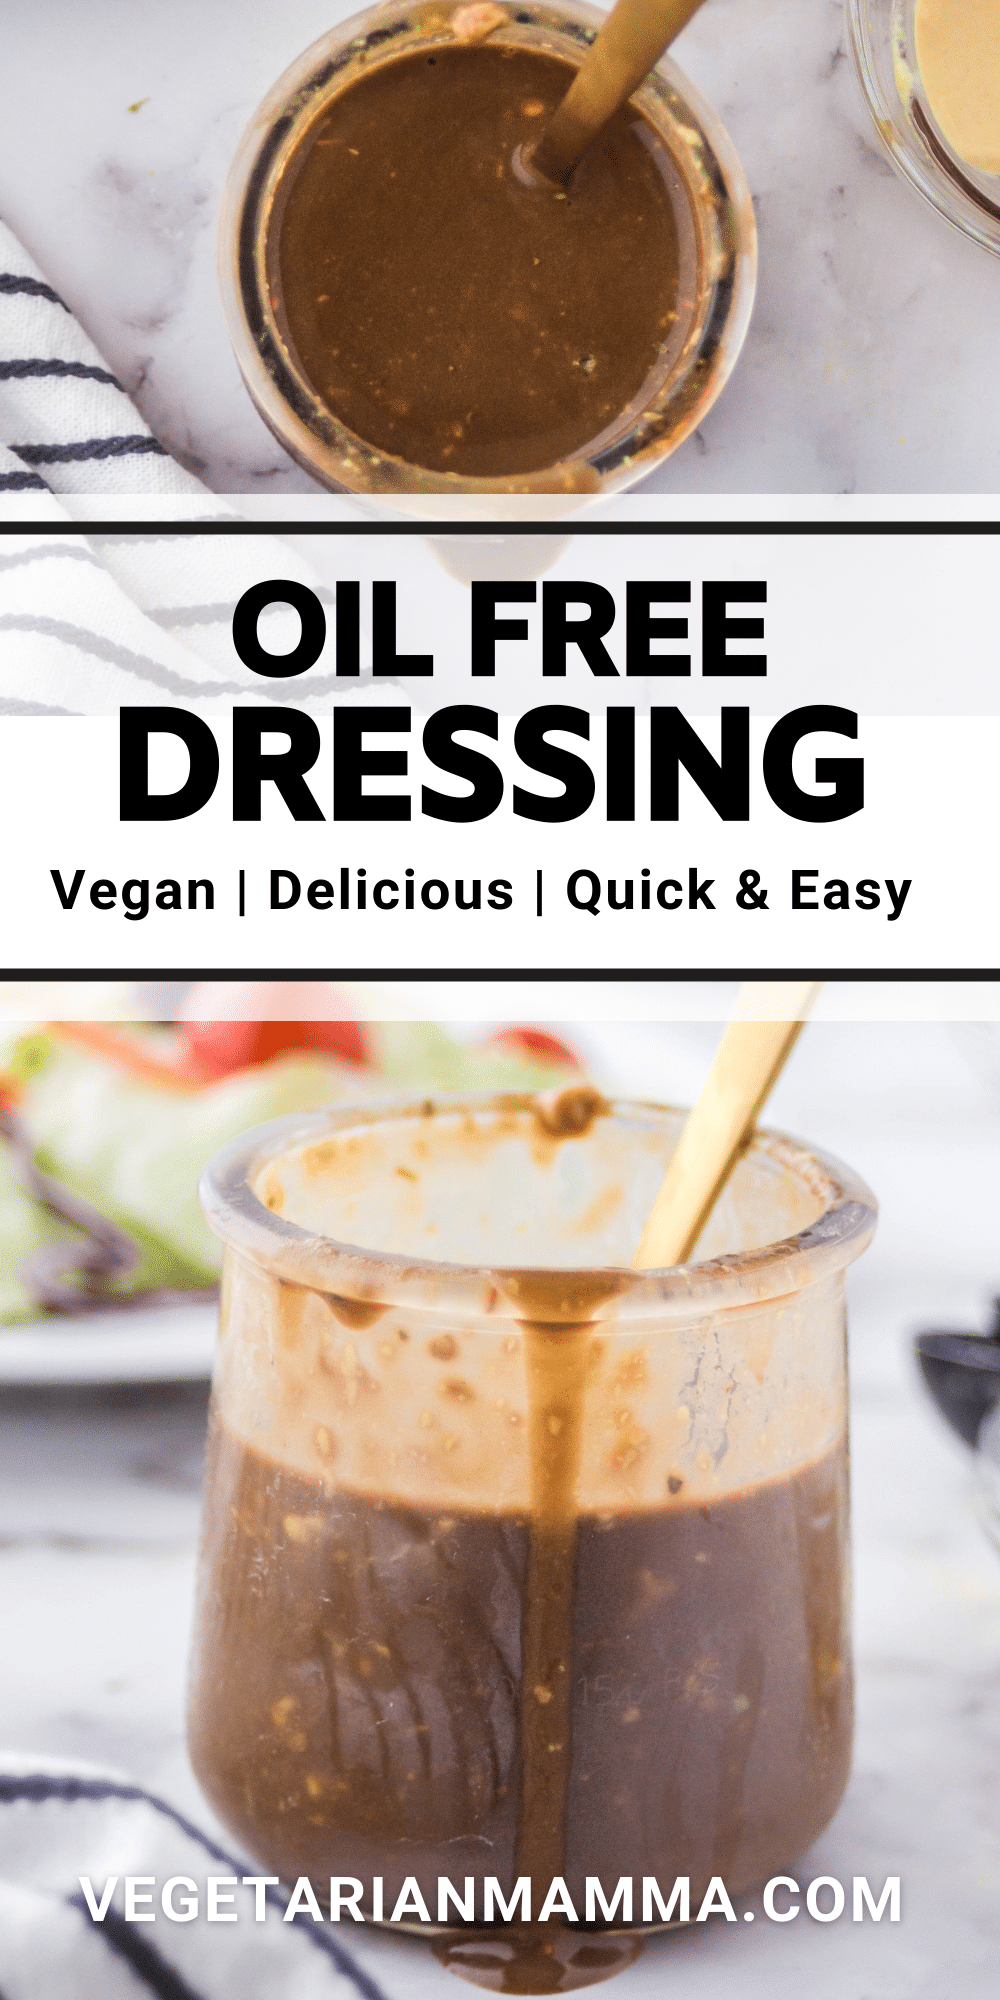 This vegan balsamic oil free salad dressing is low calorie and high in flavor. Packed with sweet and savory flavor notes, this will become your go-to salad dressing, and it's so easy to make. #salad #oilfreedressing